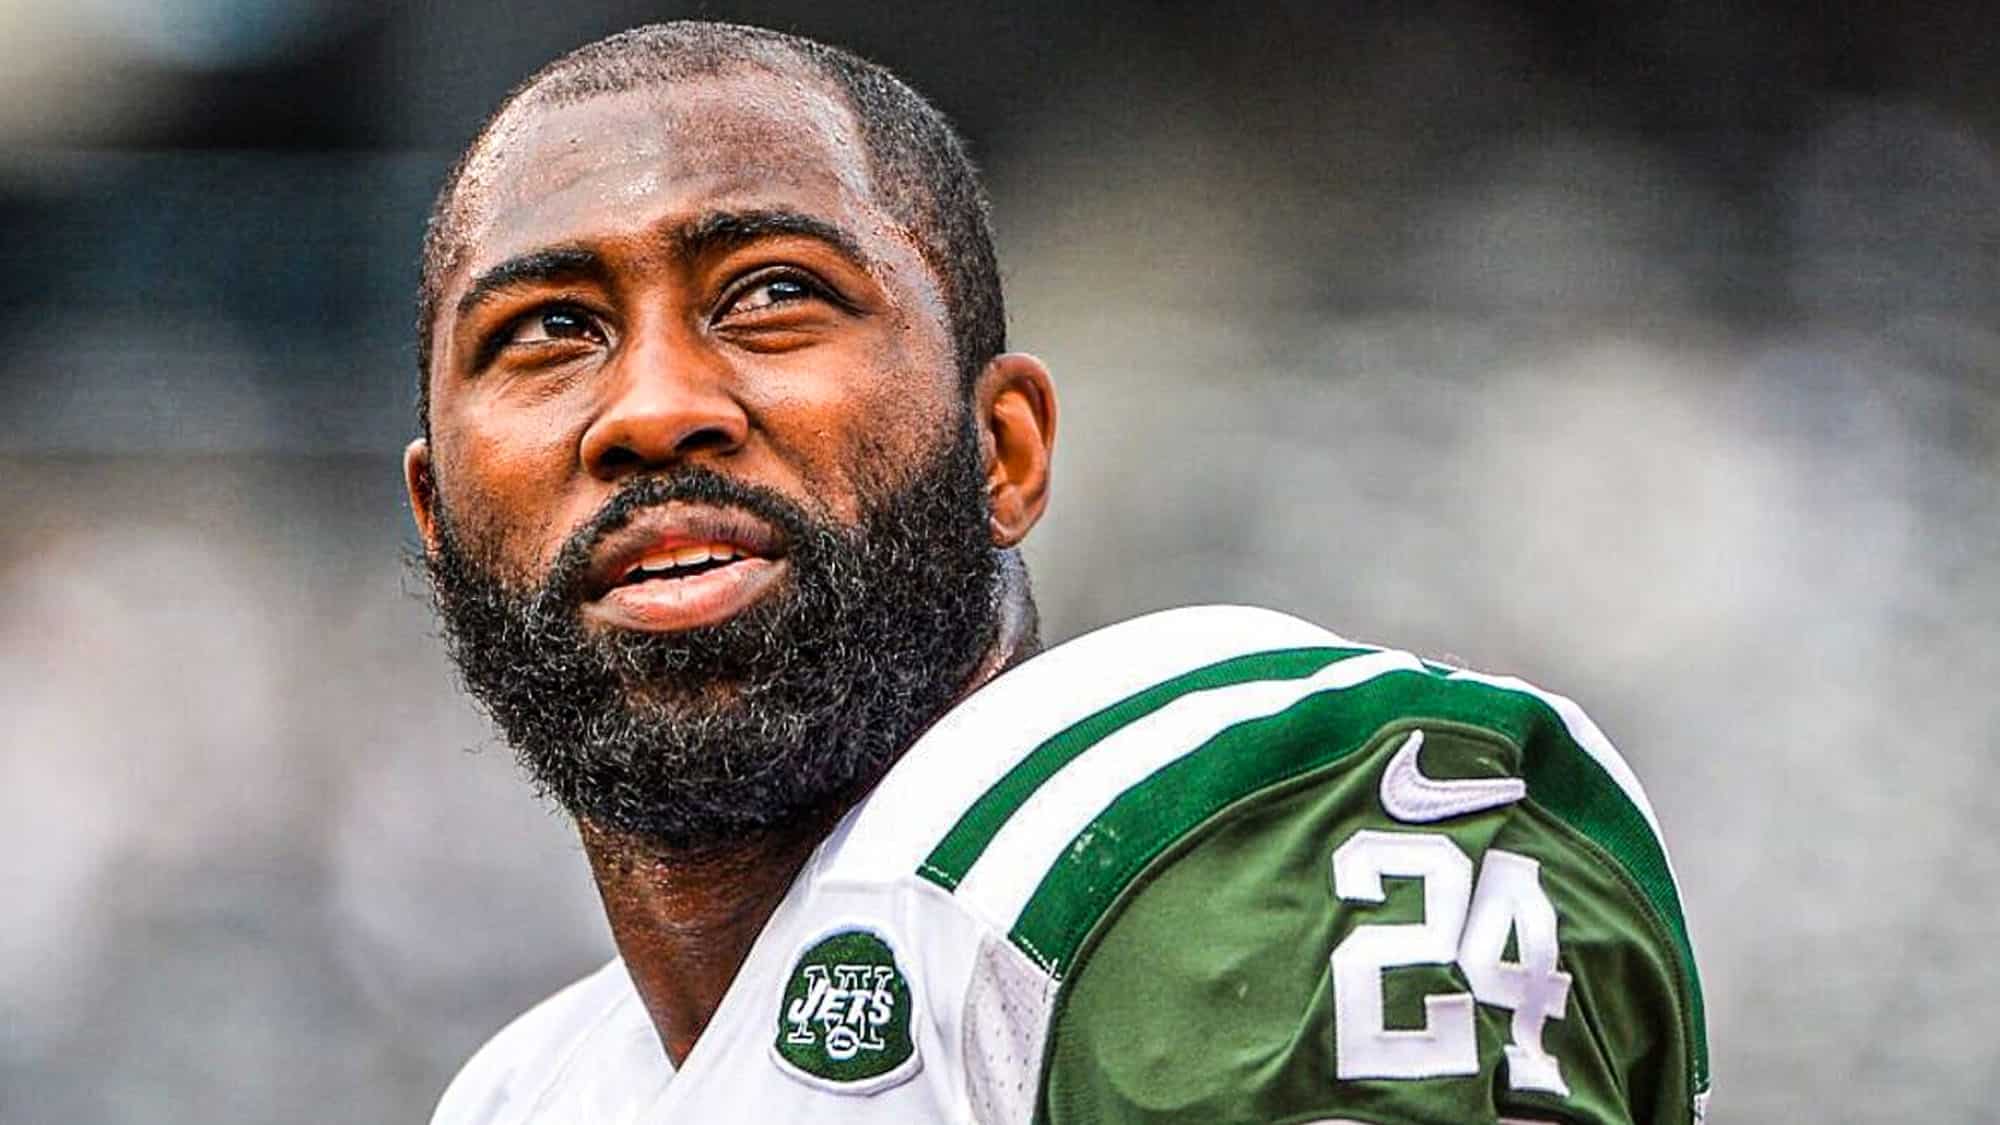 Darrelle Revis' 36th birthday was celebrated by the world of NY Jets football.